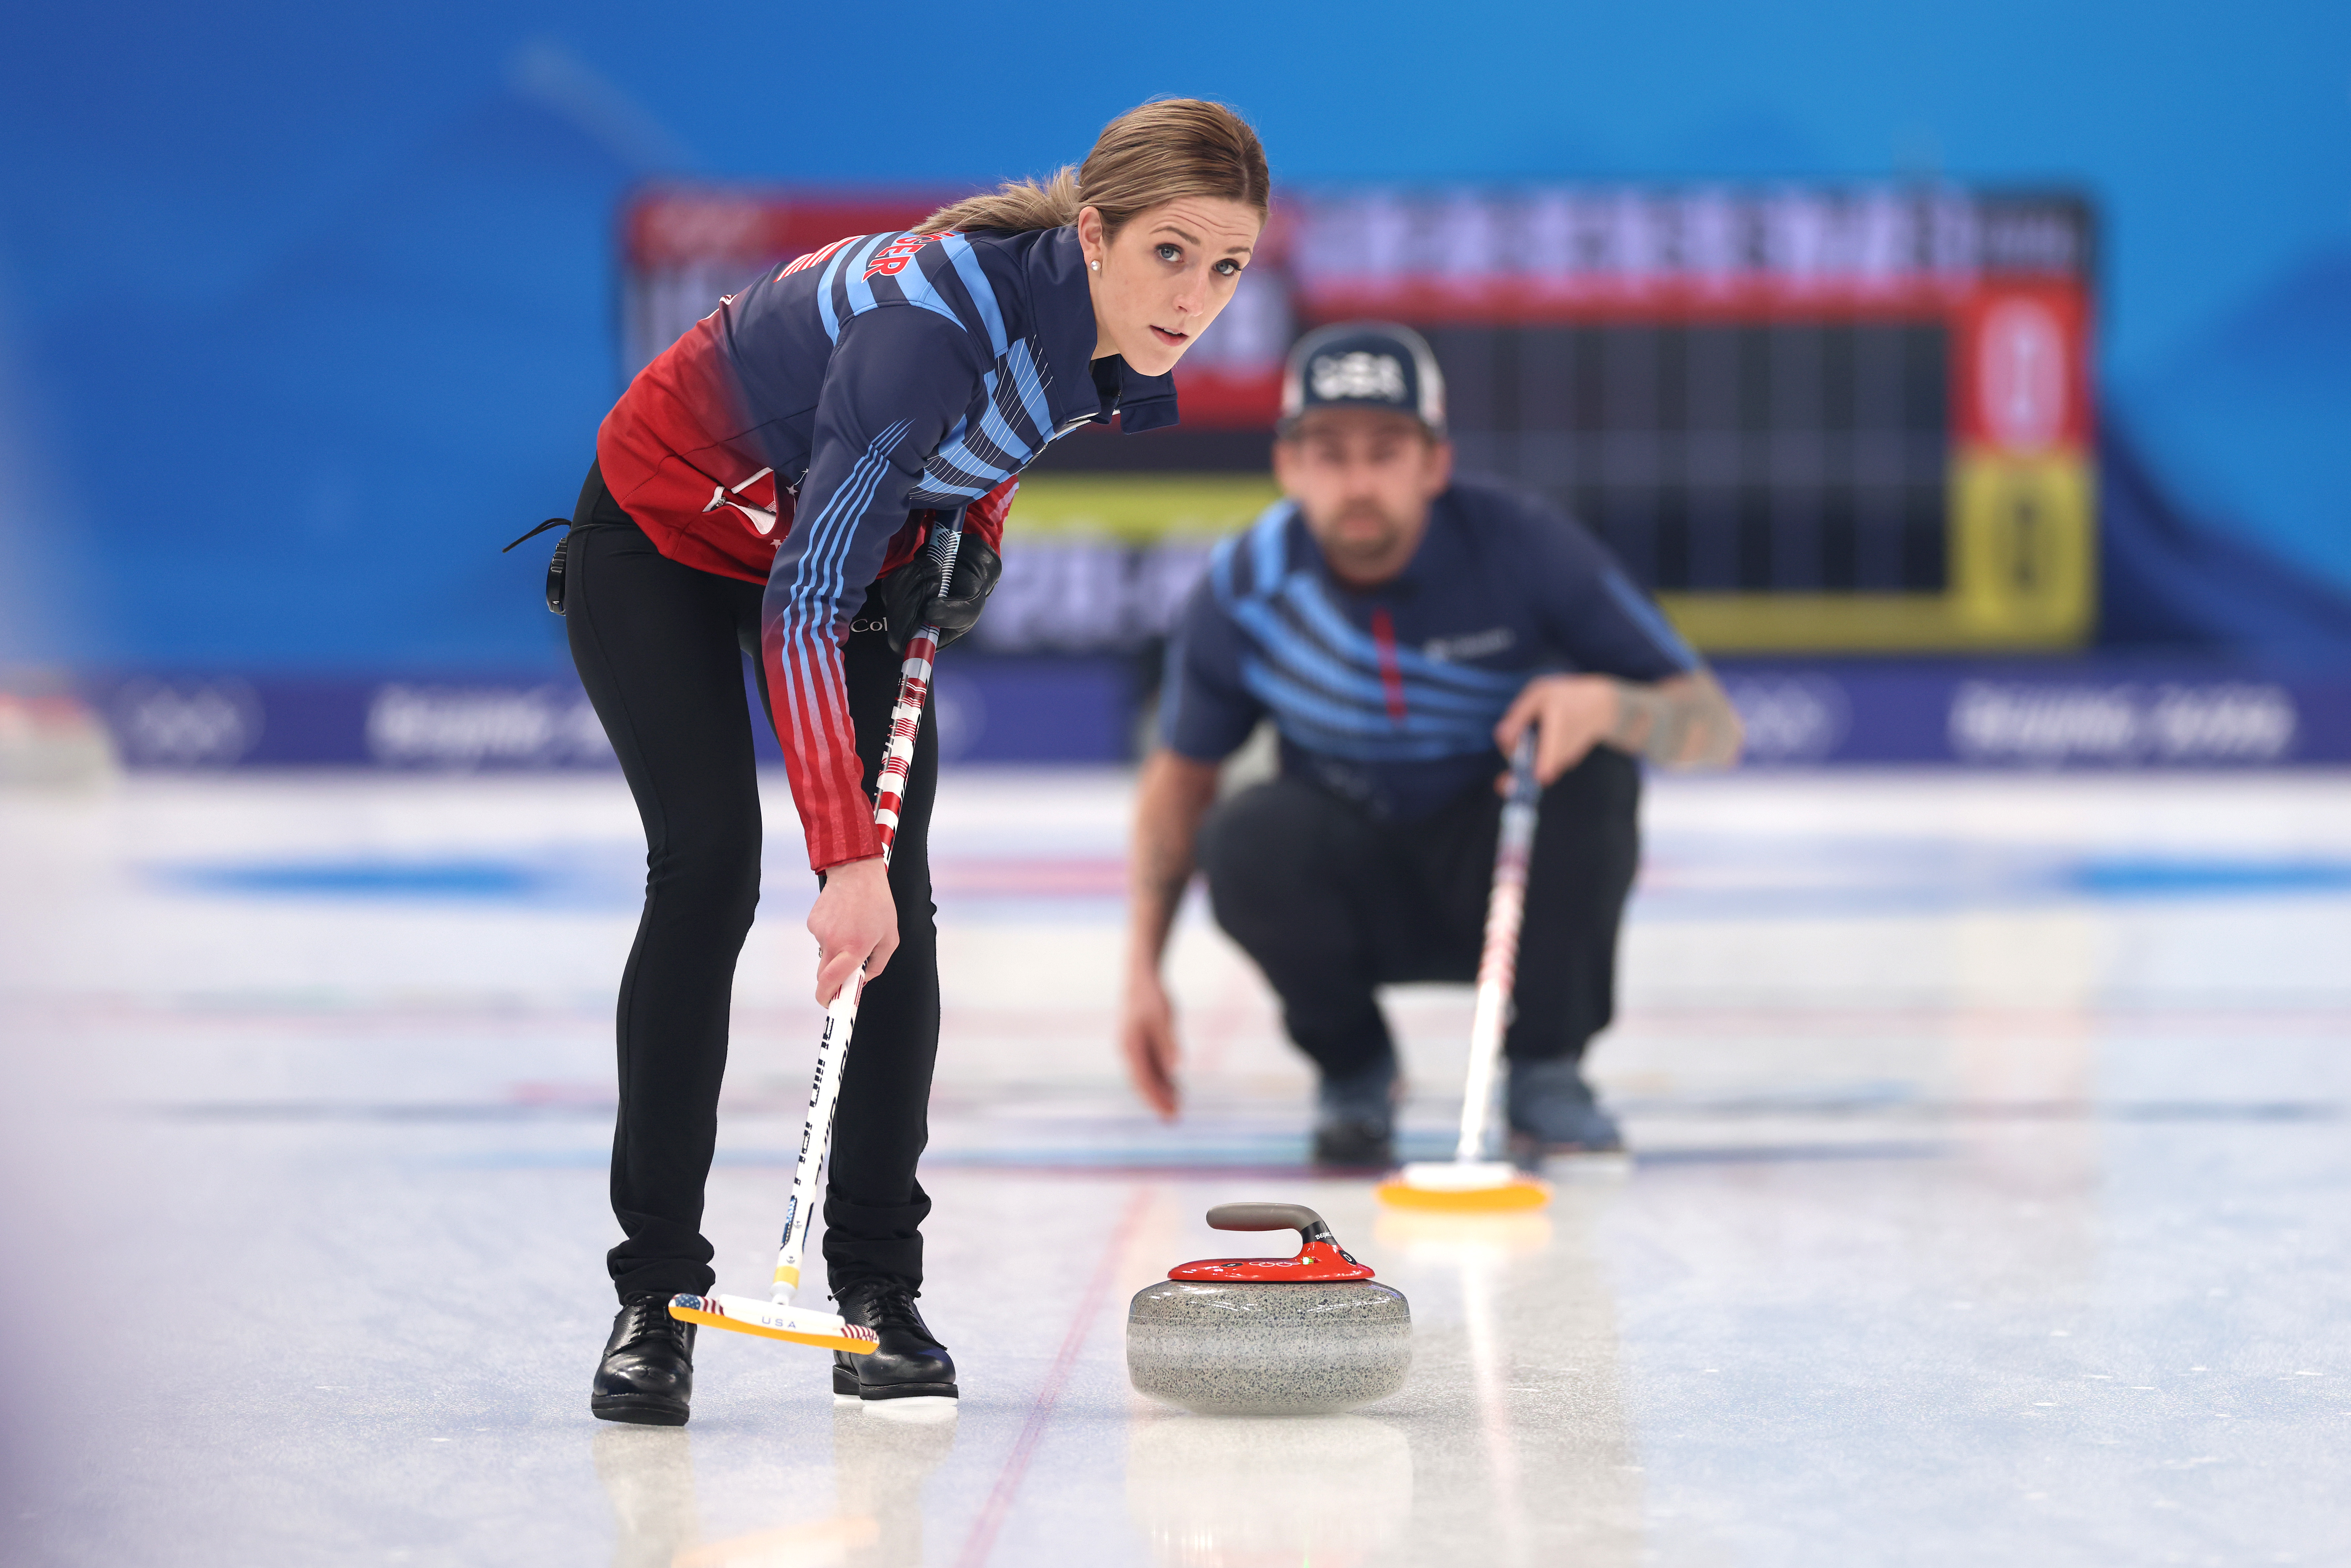 Team USA Mixed Doubles Curlers Lose to Canada, Breaking Winning Streak